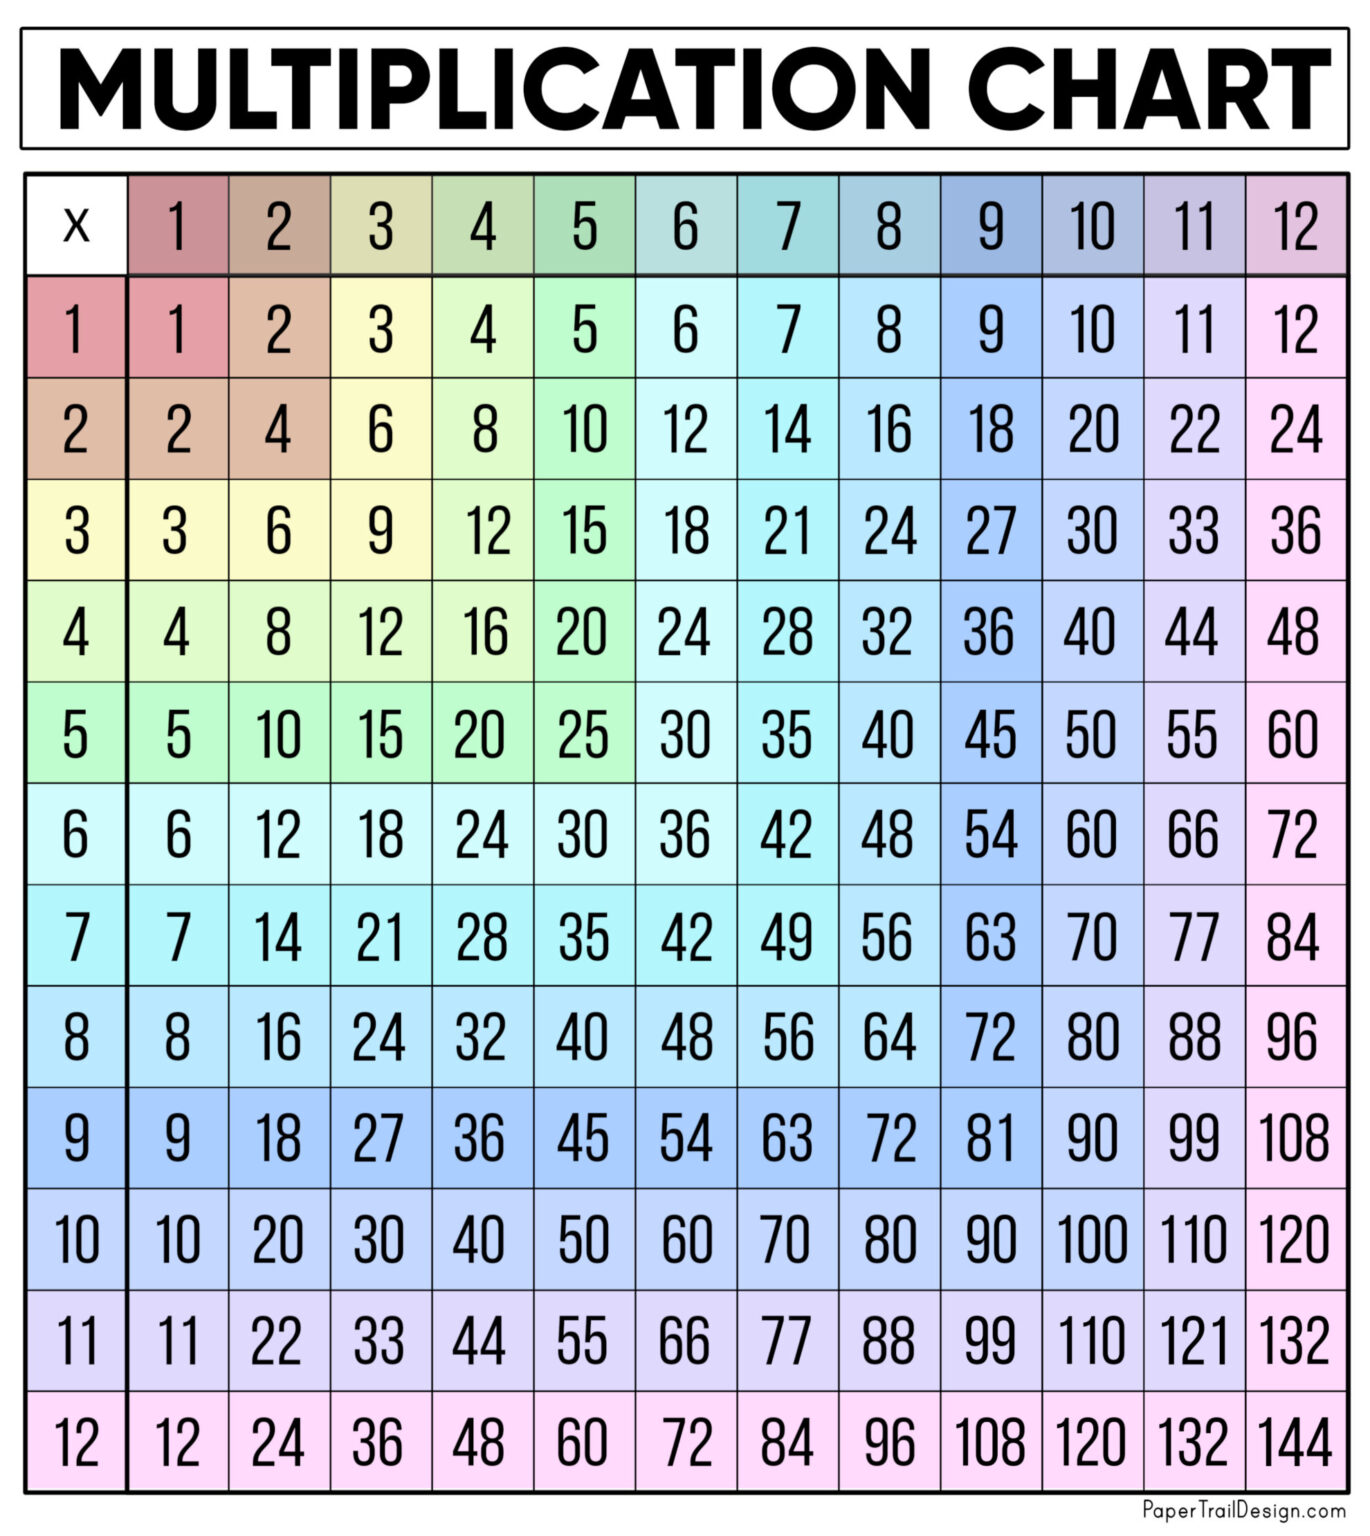 3 times tables chart up to 100